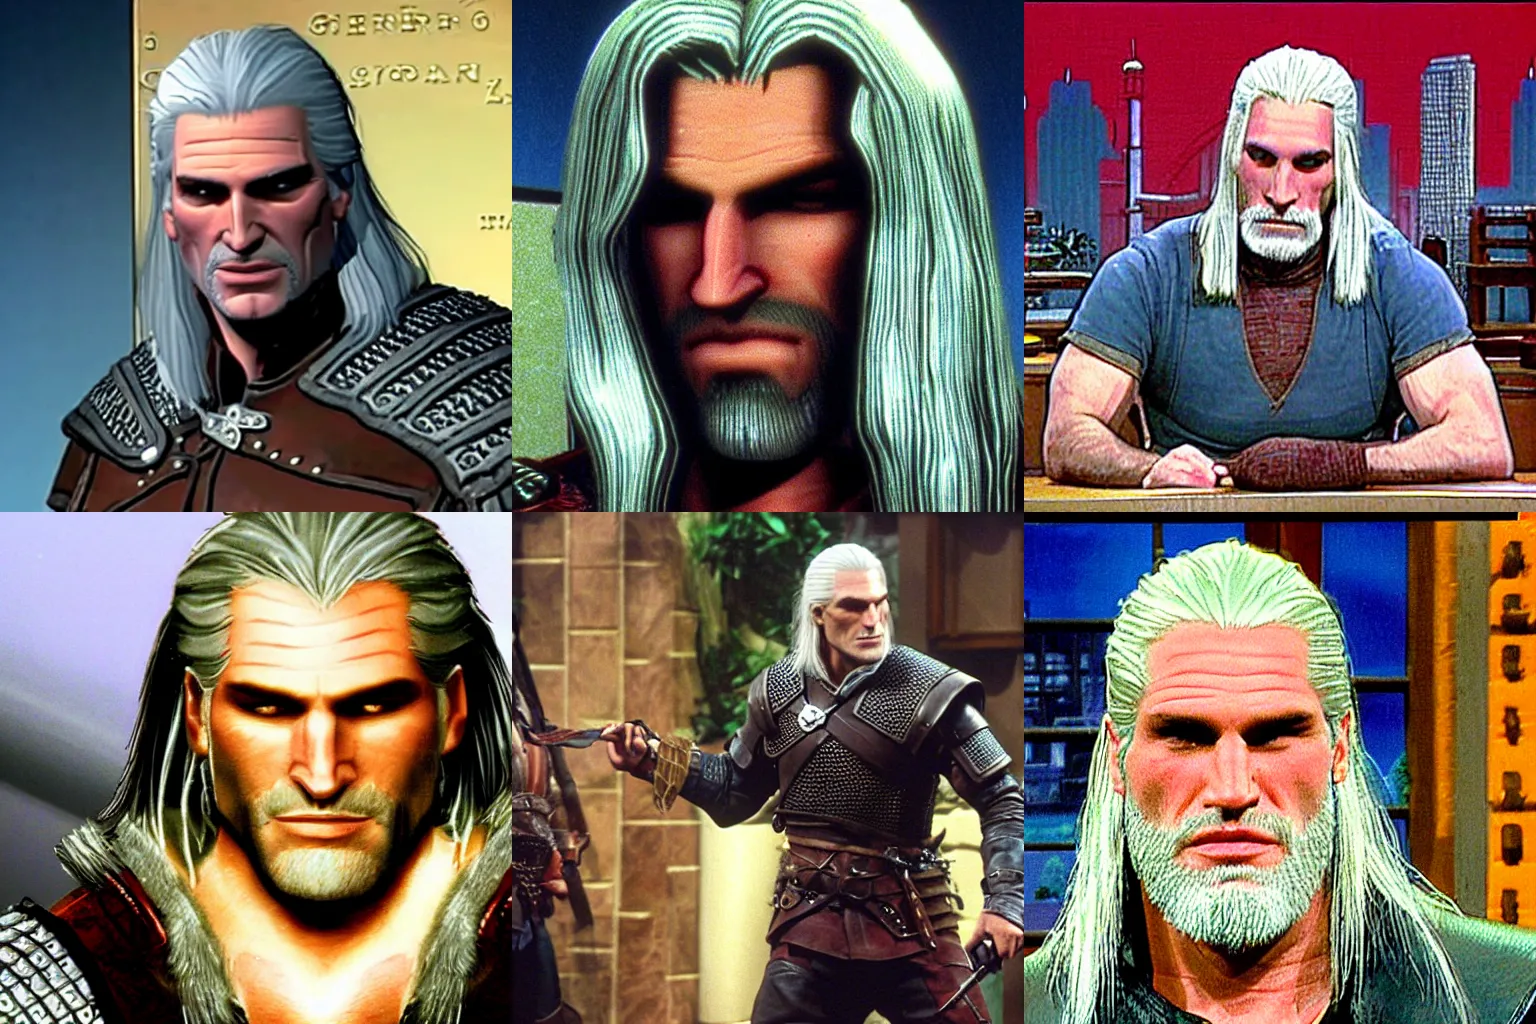 Prompt: Screencap of Geralt of Rivia's appearance on the Late Night with Conan O'Brien show in 1995, highly detailed, clear faces